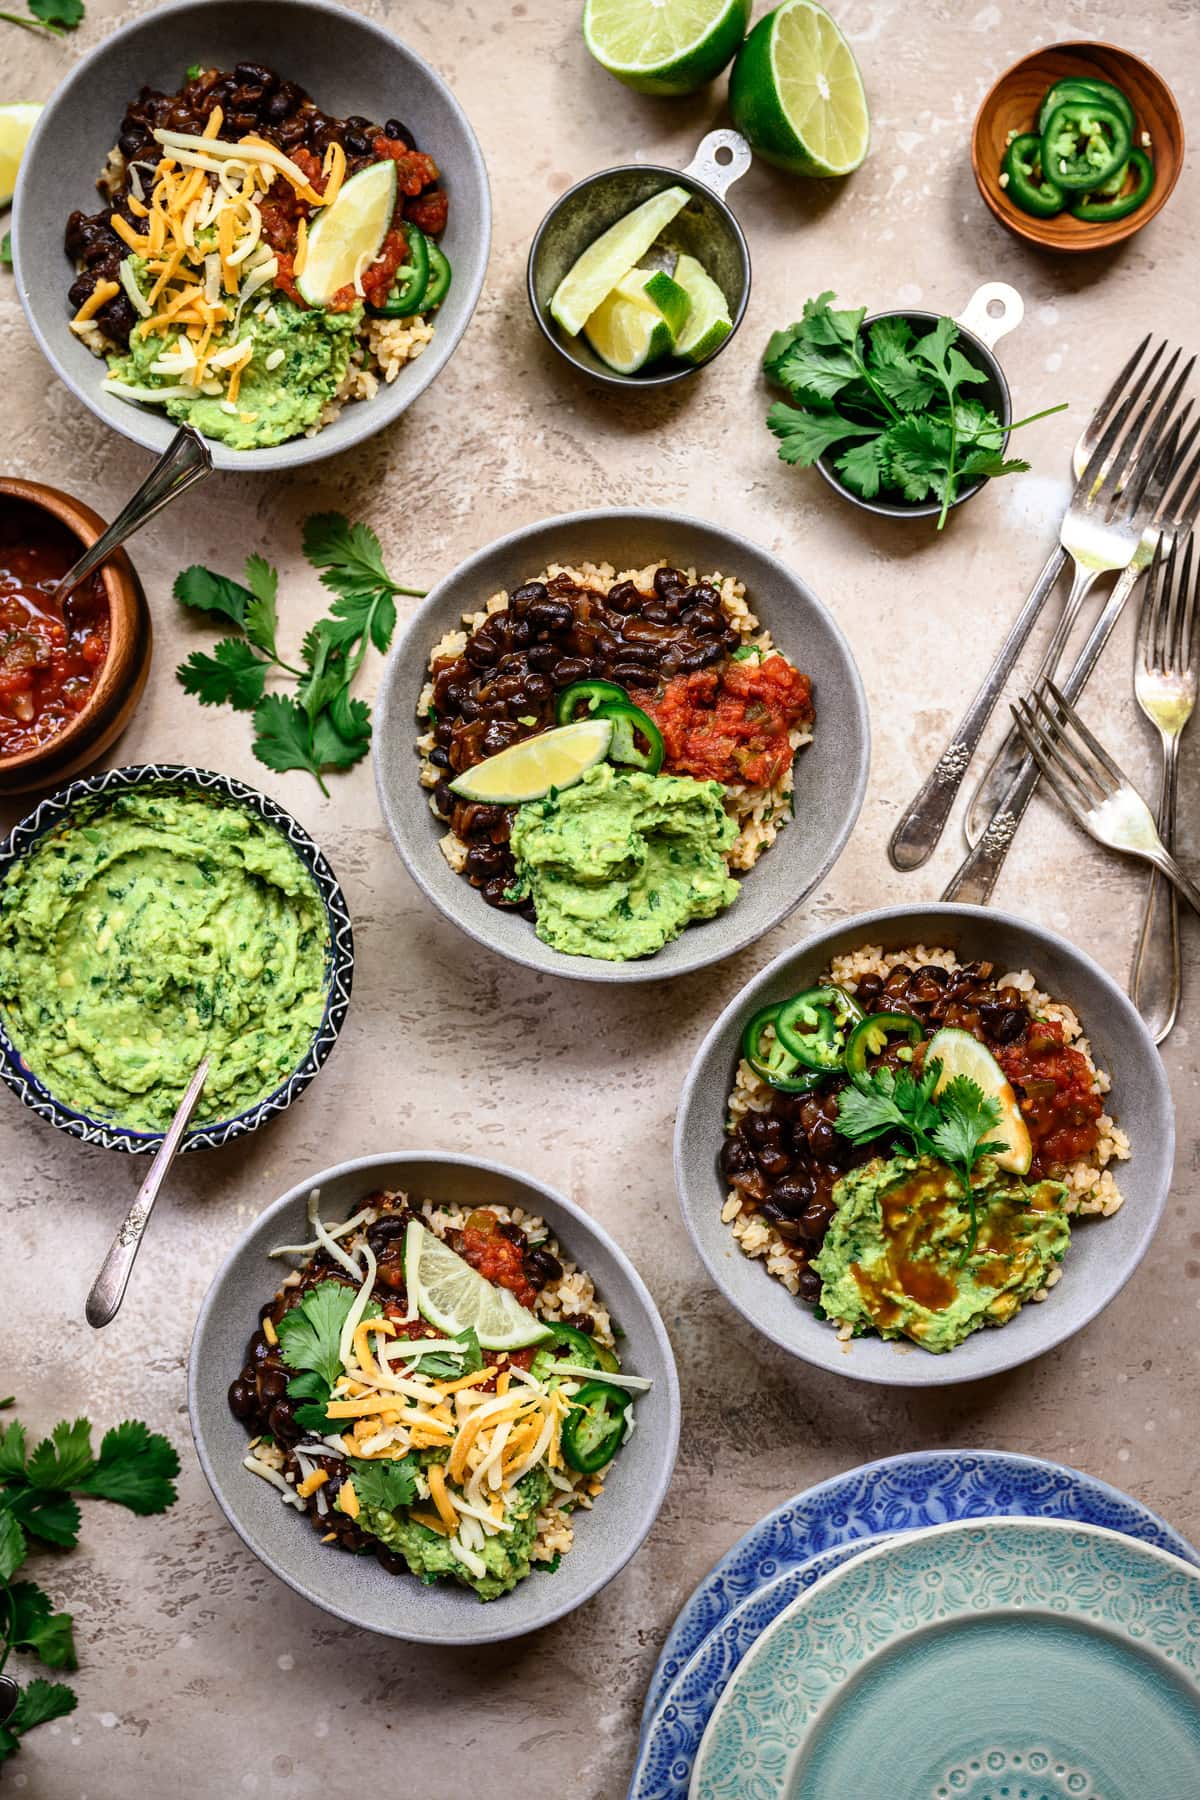 Overhead view of vegan burrito bowls with spicy black beans and guacamole in grey bowls on rustic background